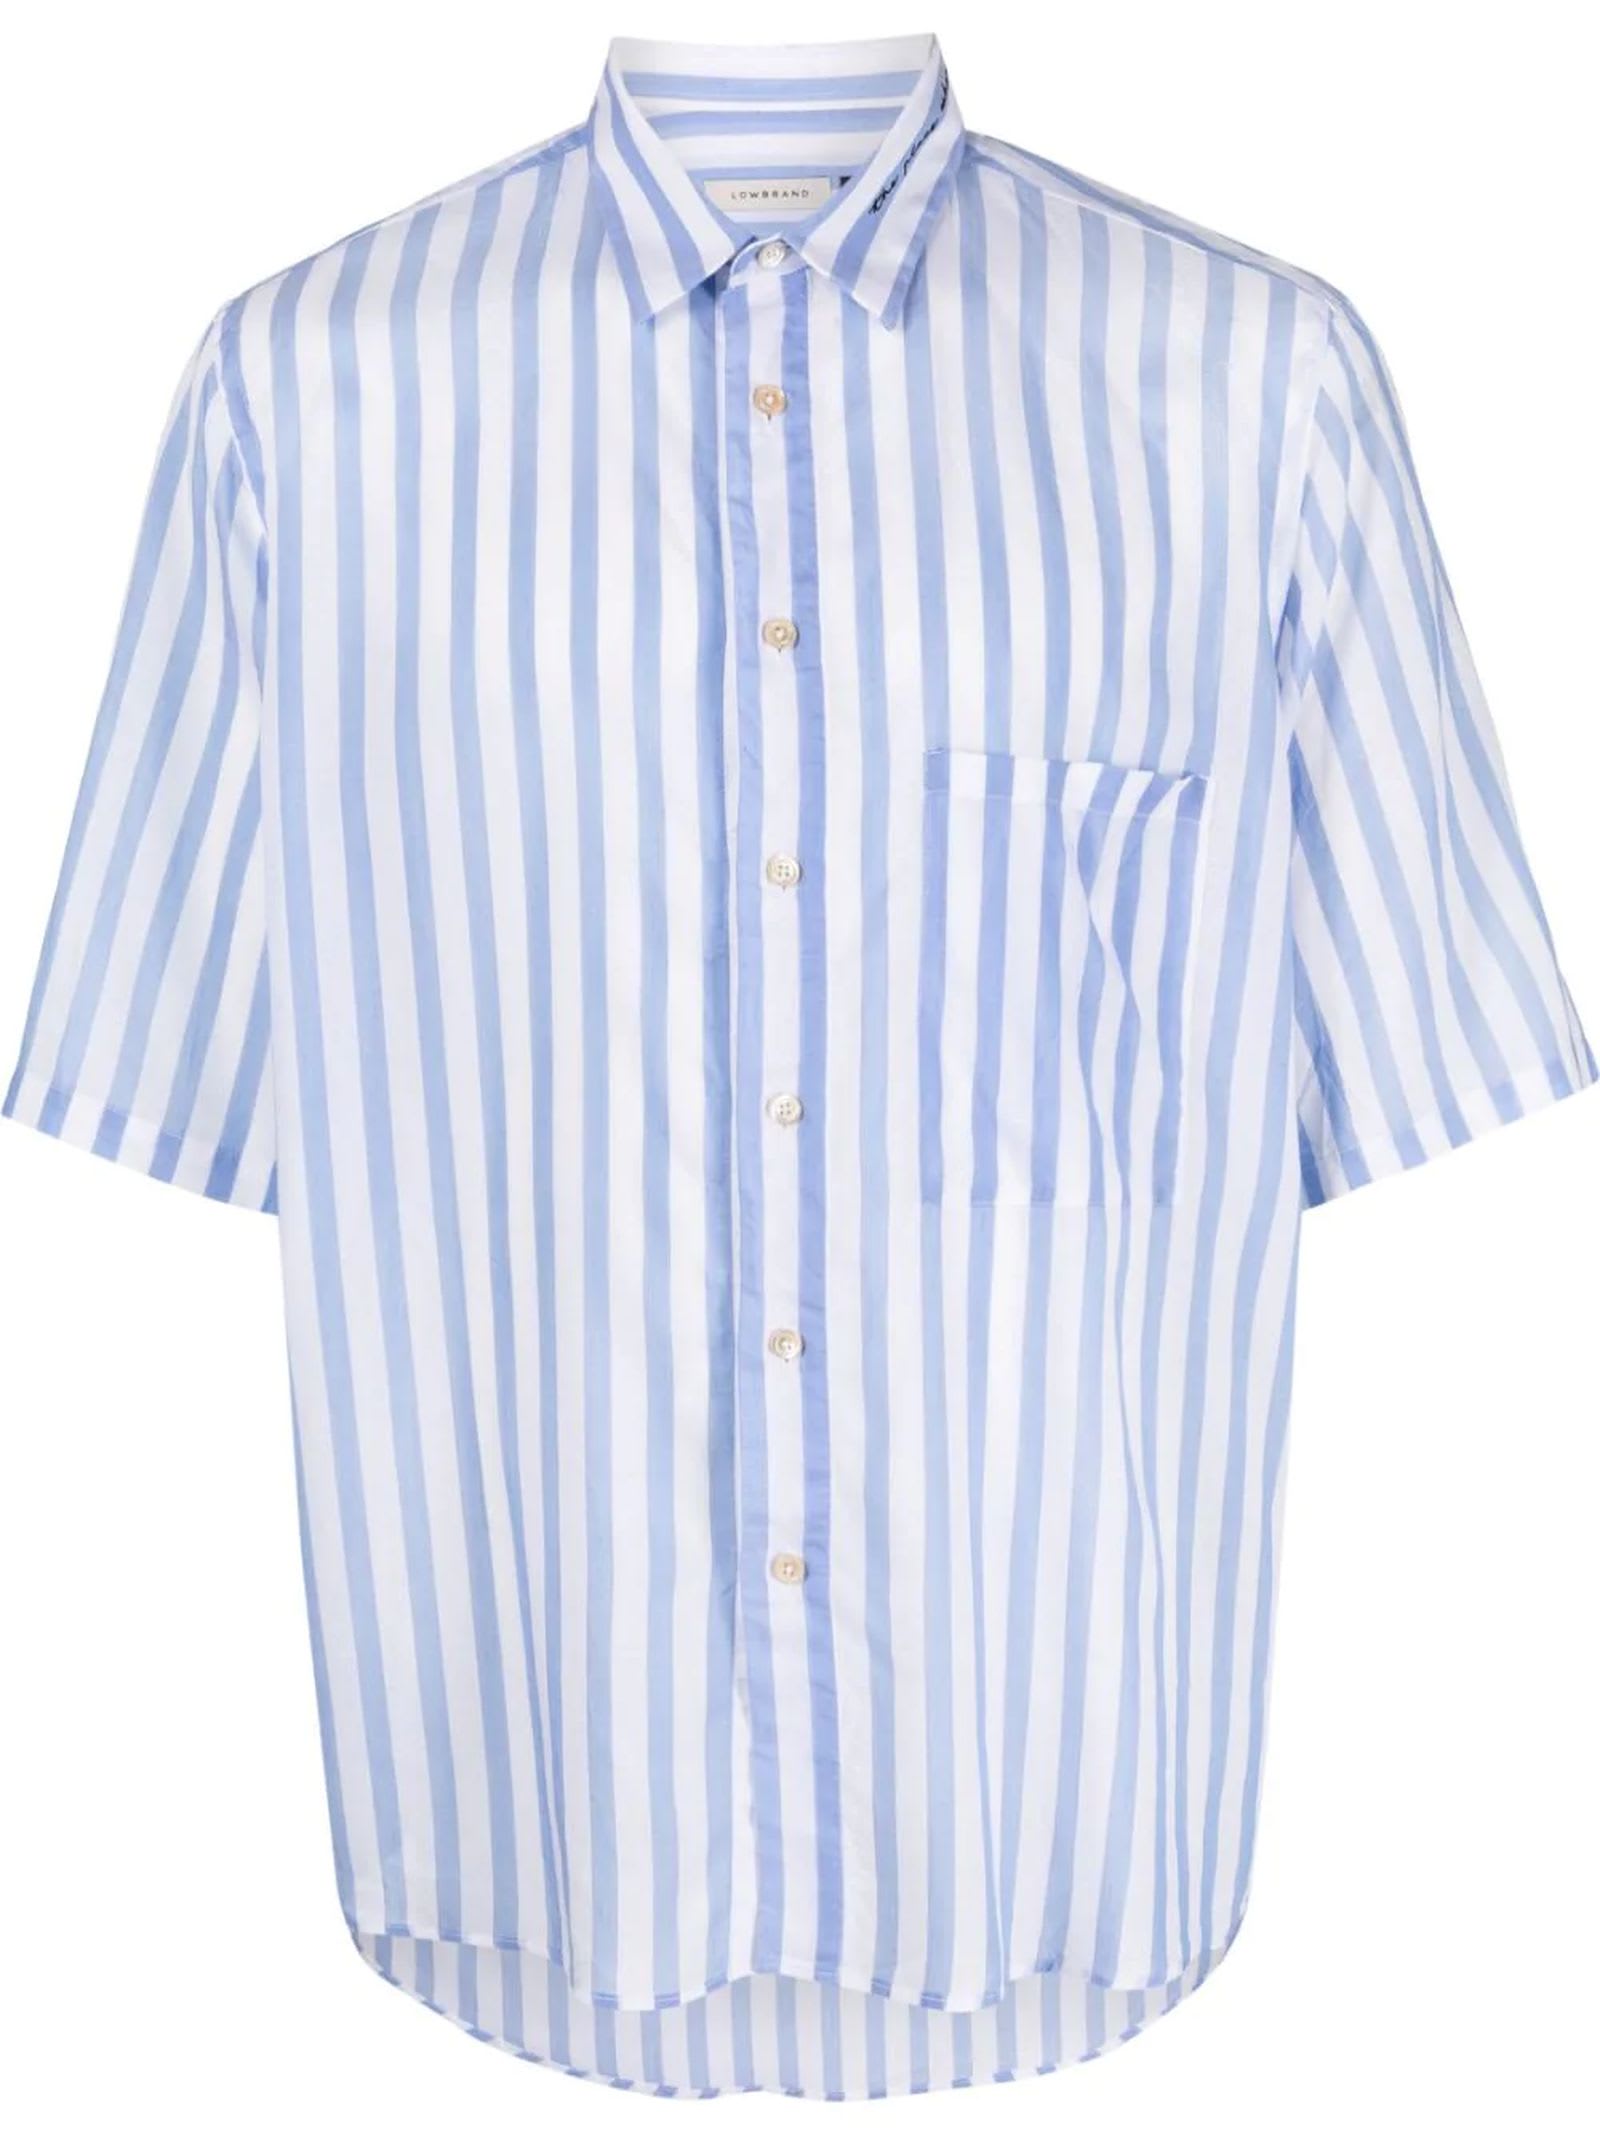 Low Brand Blue And White Striped Shirt